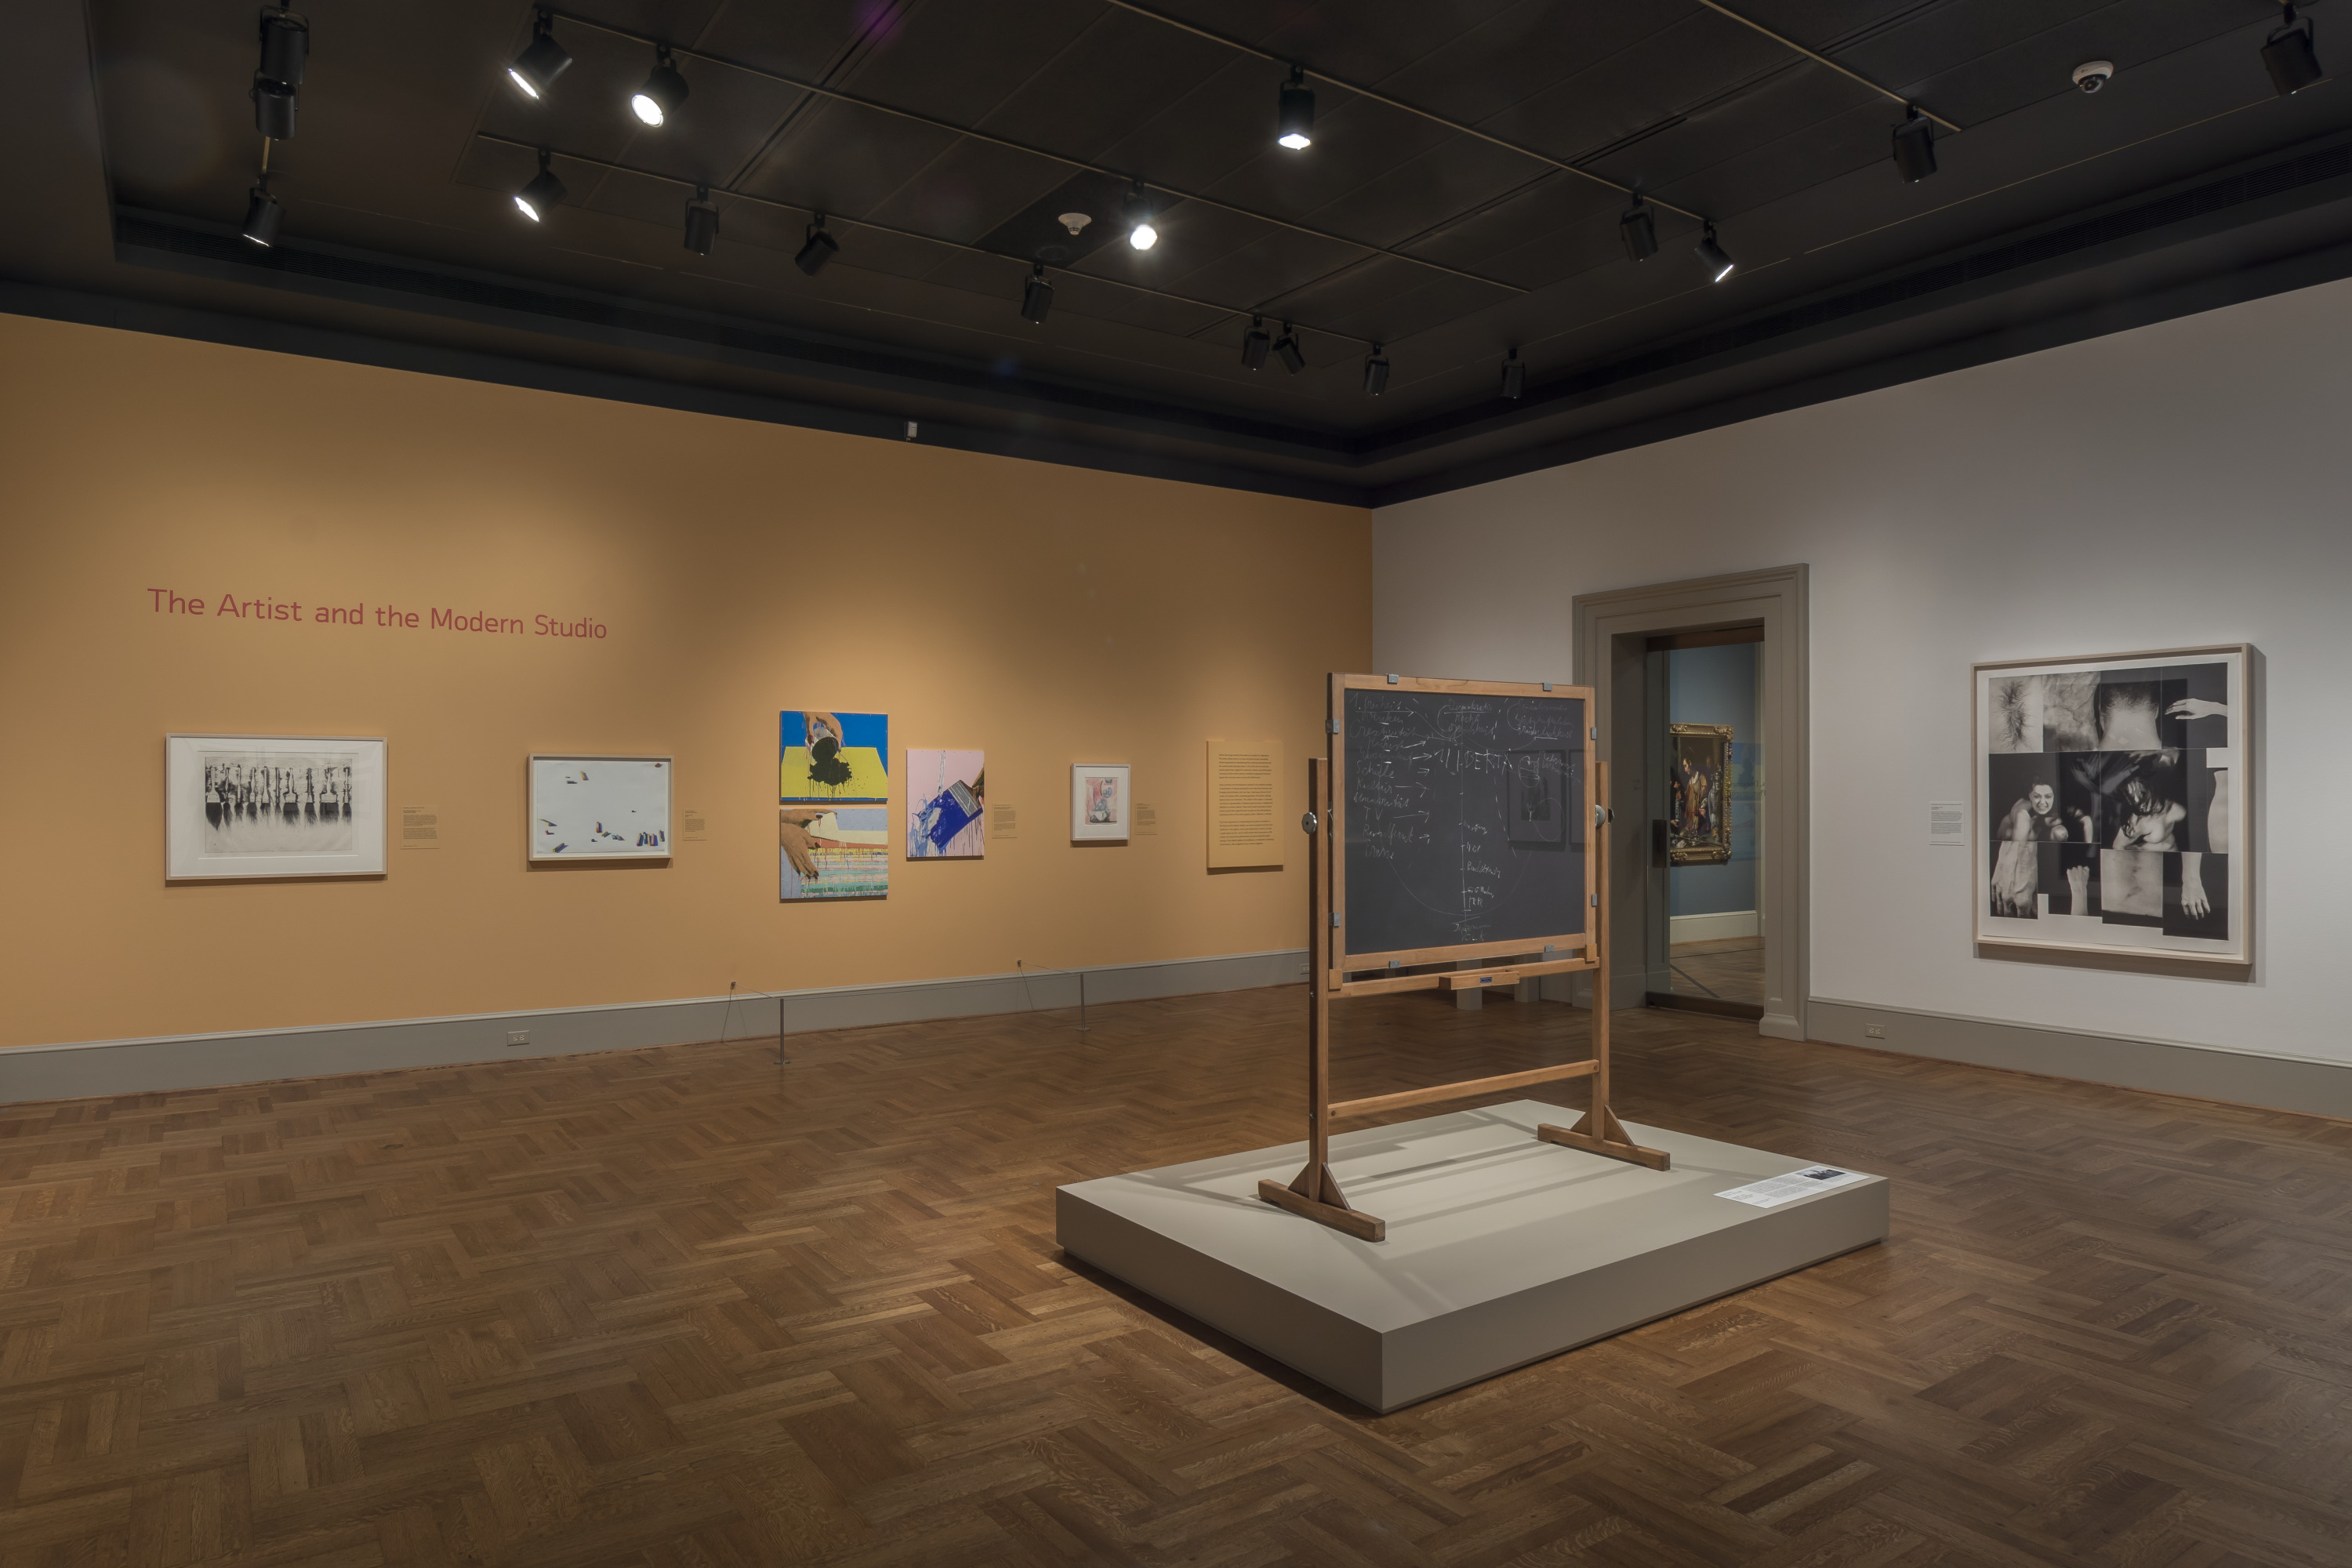 The Artist and the Modern Studio | Exhibitions - Saint Louis Art Museum